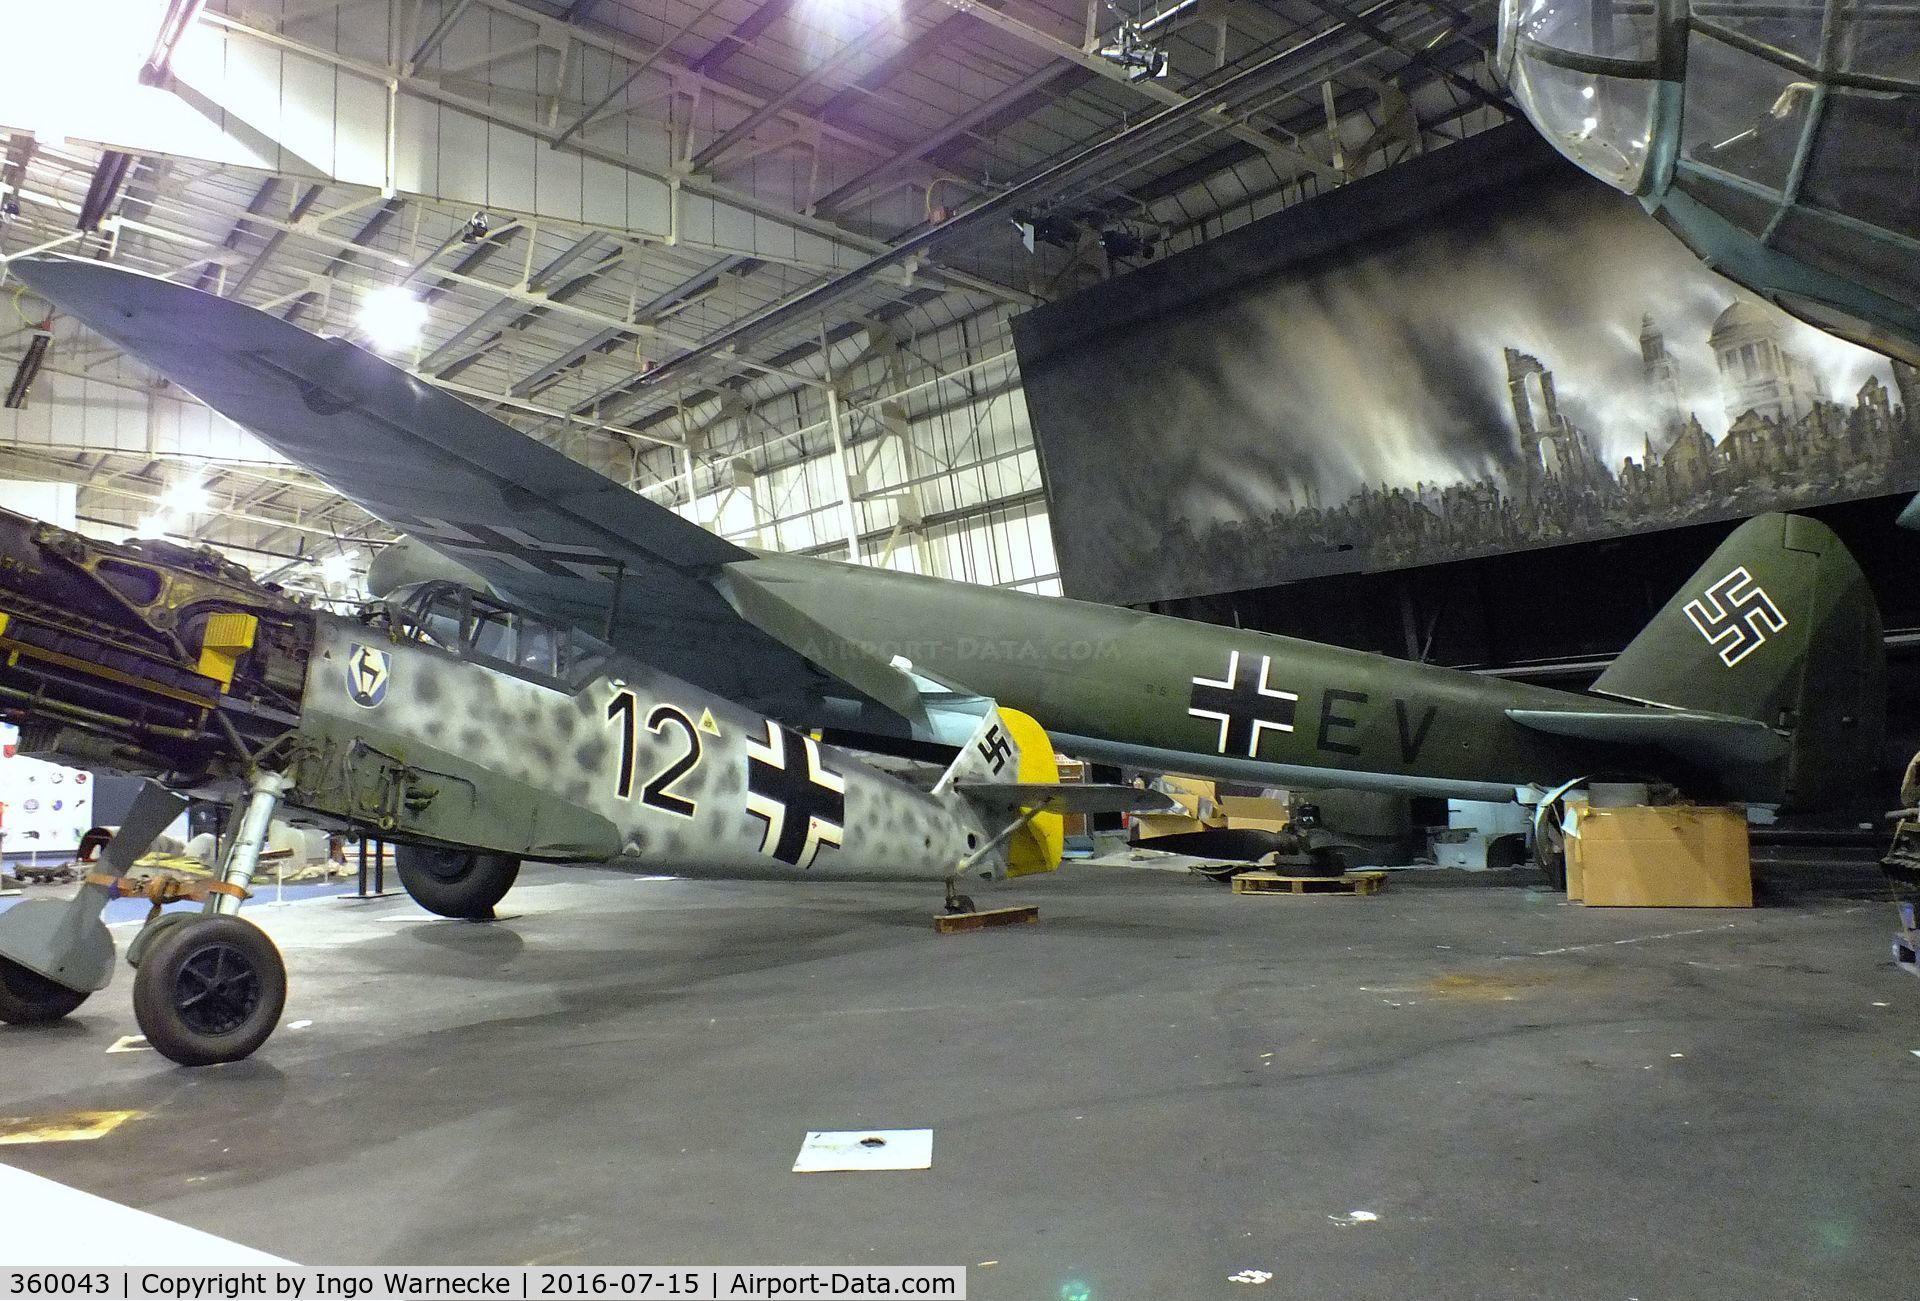 360043, Junkers Ju-88R-1 C/N 360043, Junkers Ju 88R-1 (getting dismantled for removal from the Battle of Britain Hall) at the RAF-Museum, Hendon